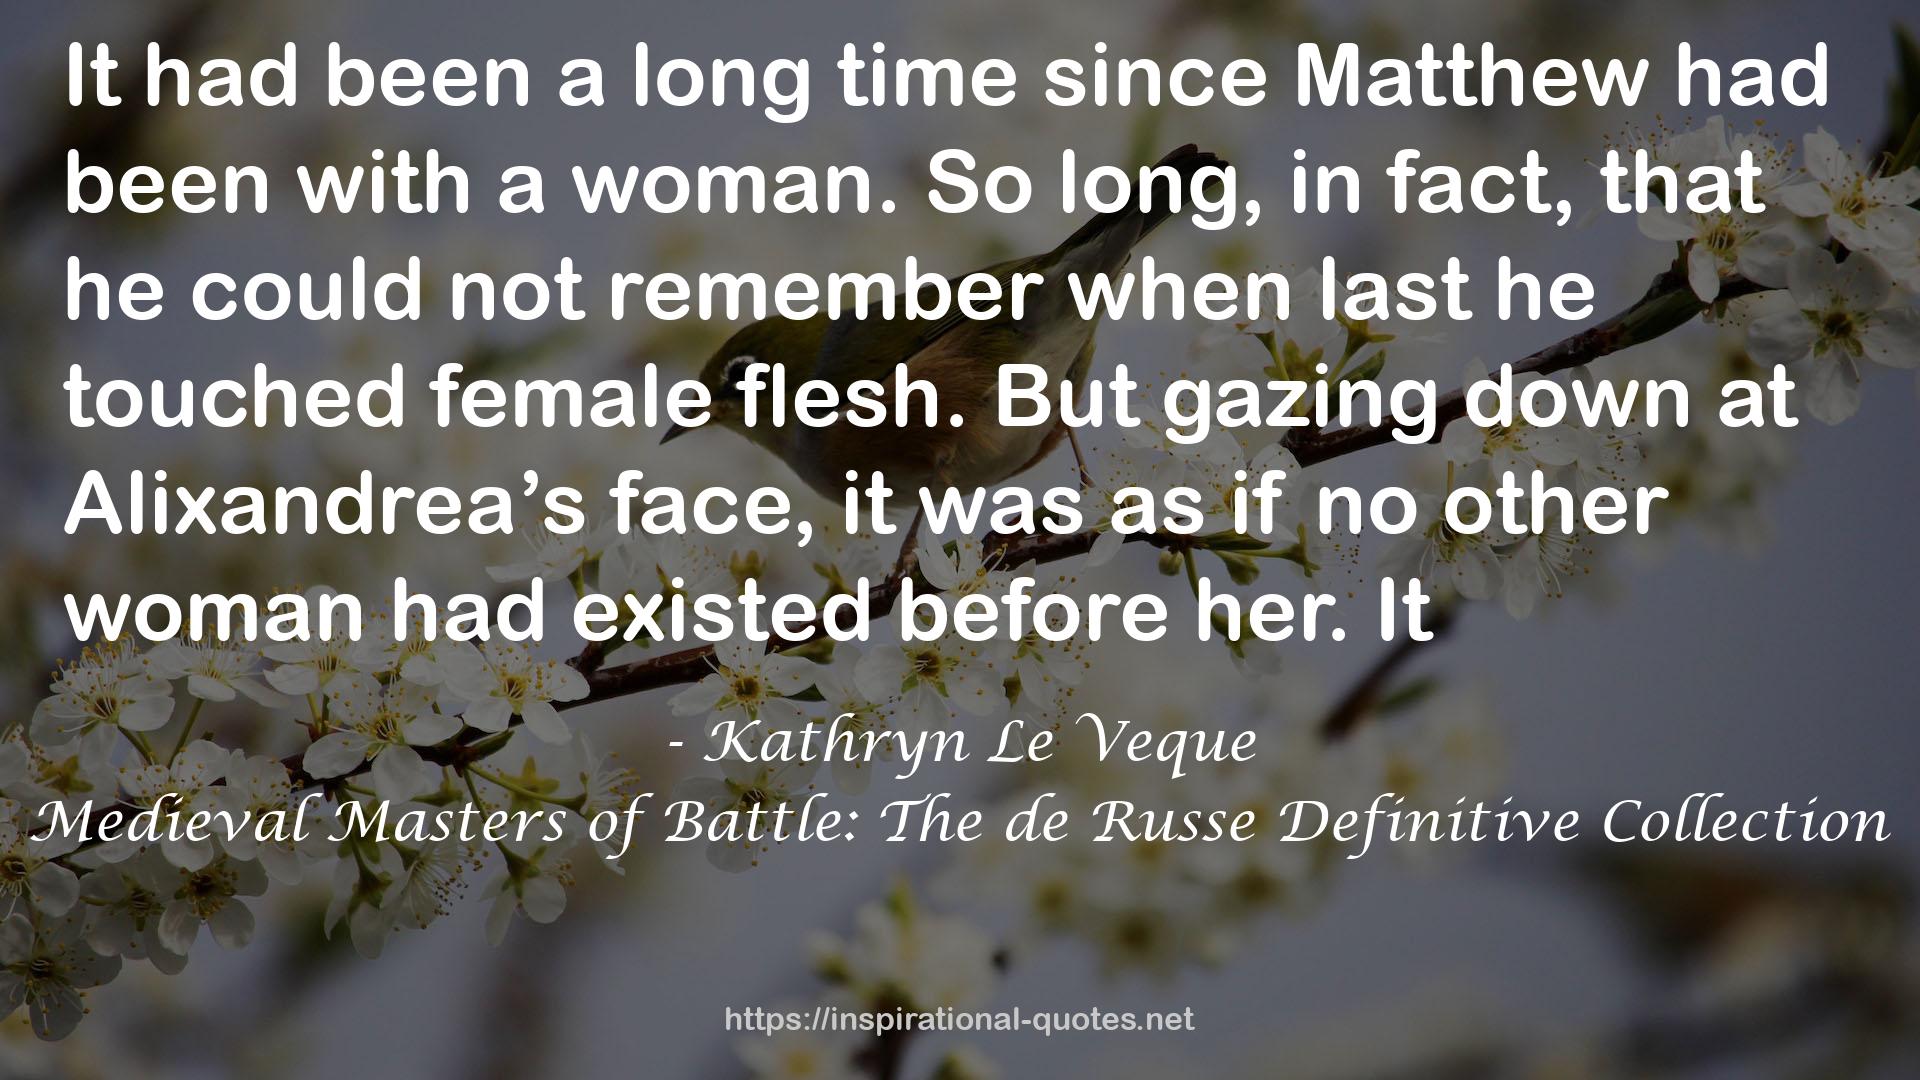 Medieval Masters of Battle: The de Russe Definitive Collection QUOTES